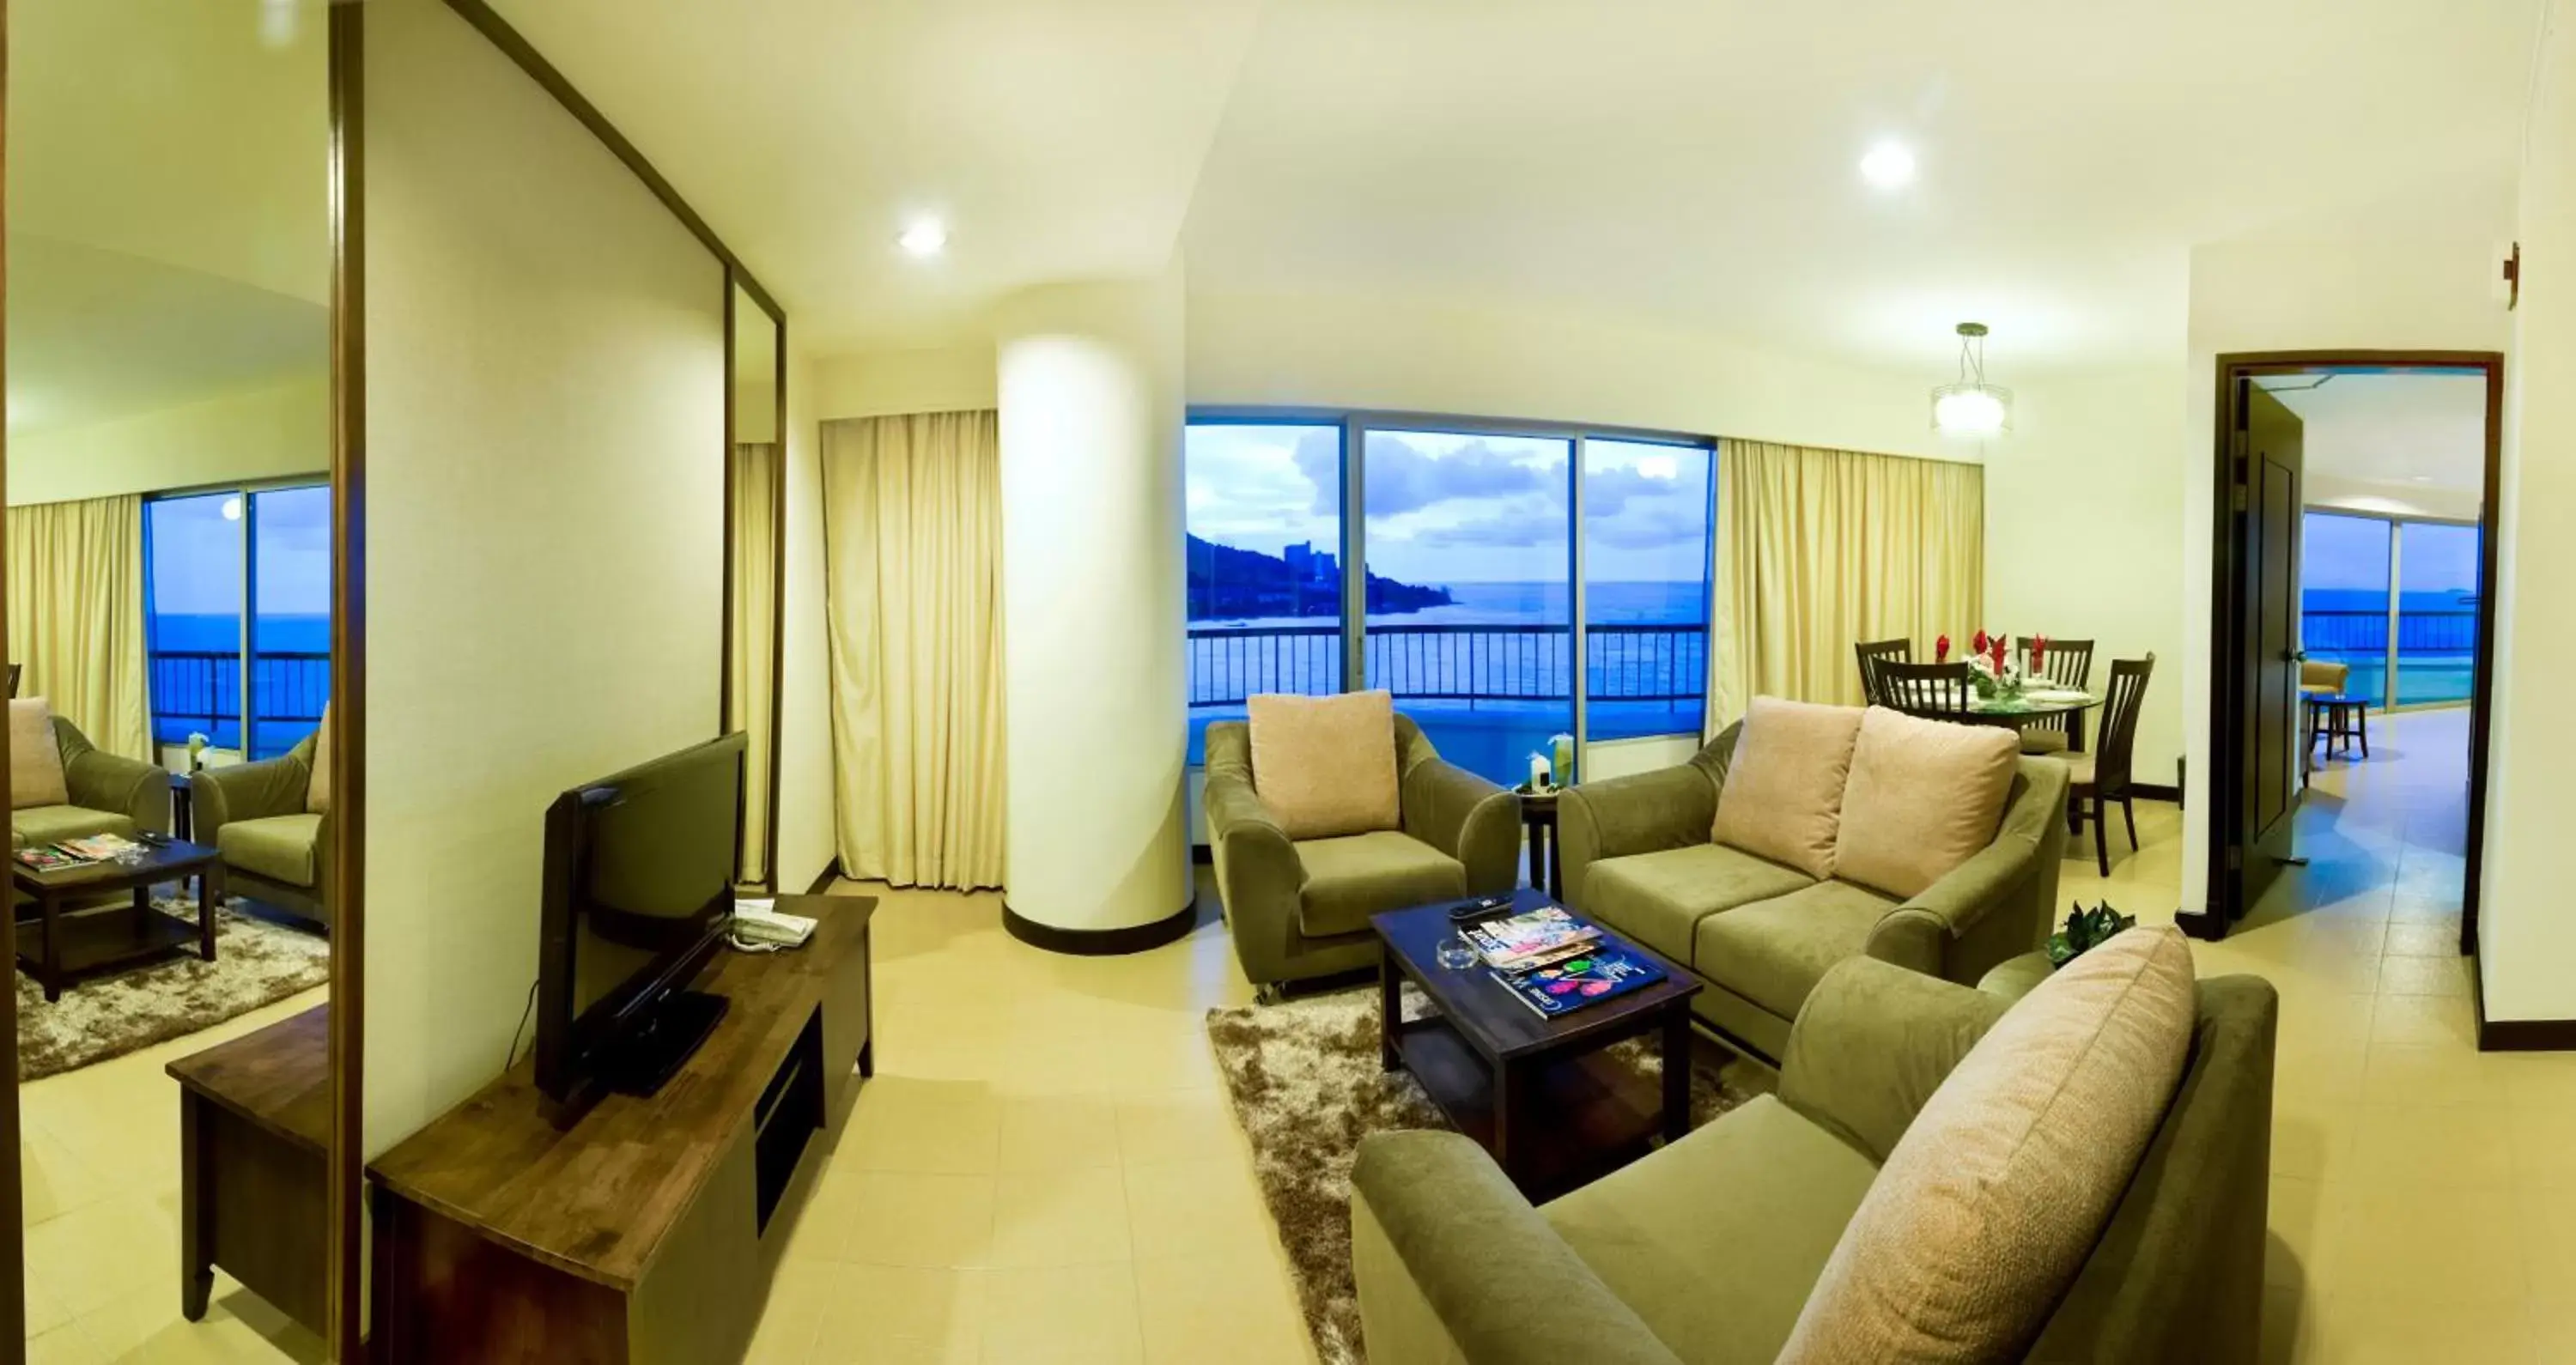 TV and multimedia, Seating Area in Flamingo Hotel by the Beach, Penang